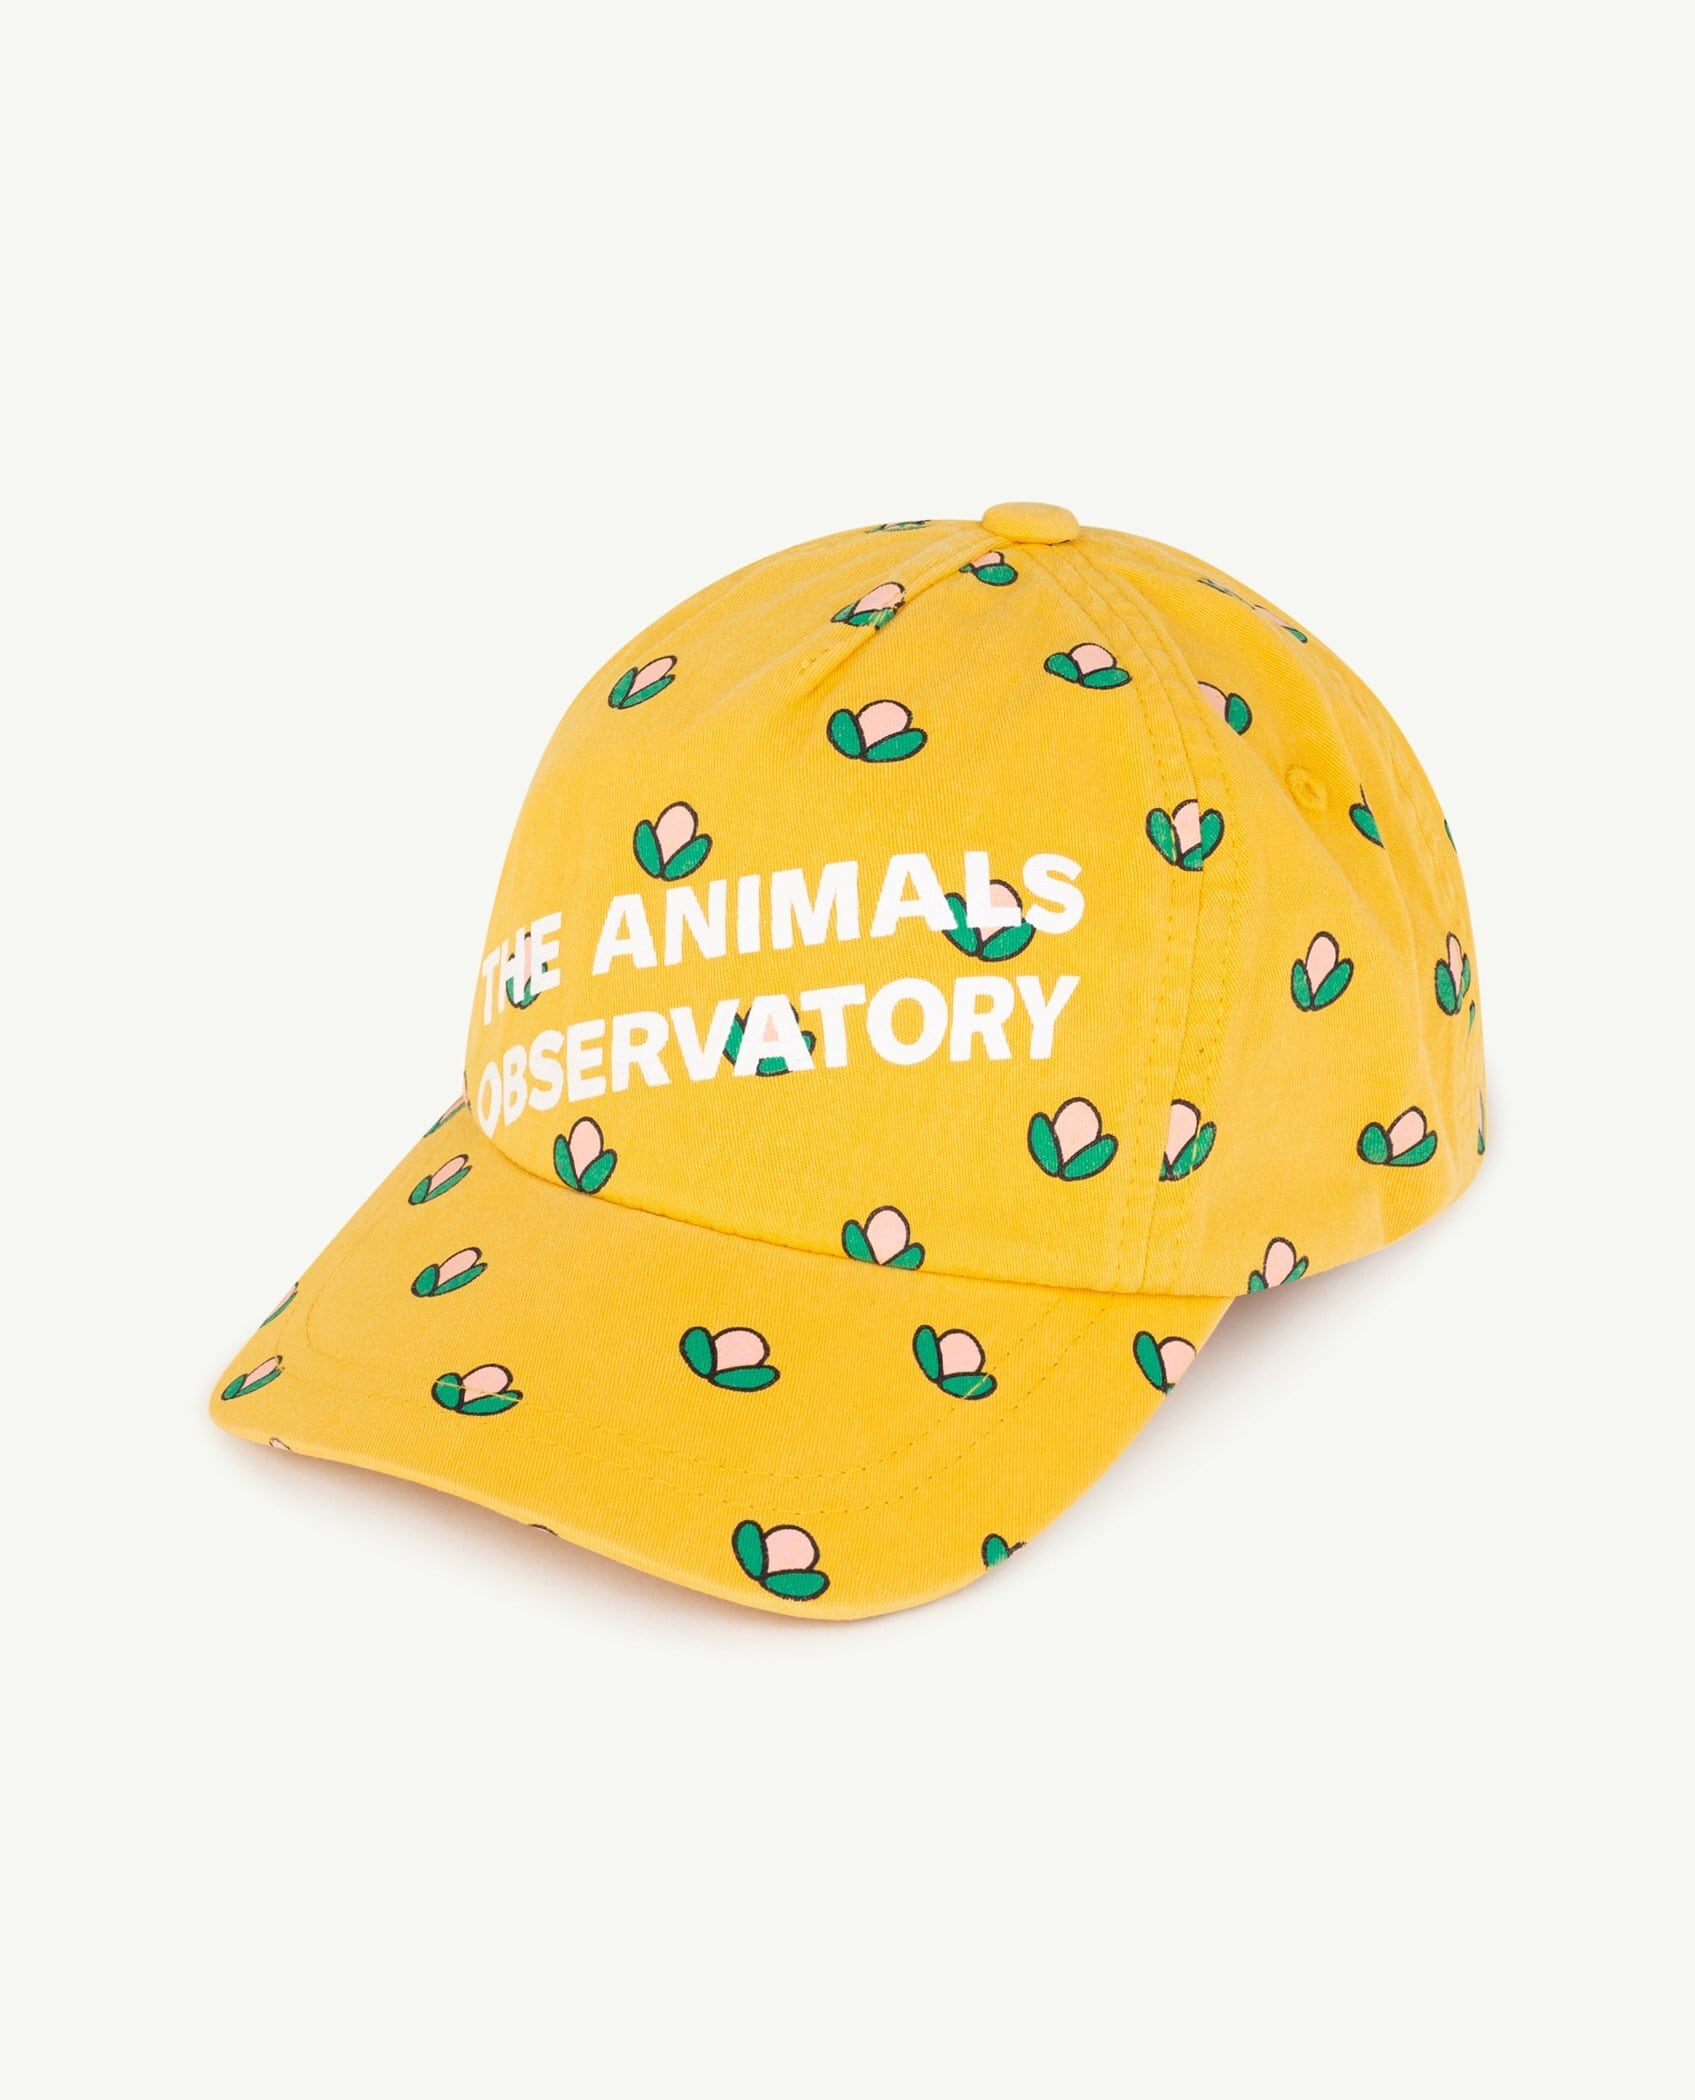 【SALE】TAO PRE 2022AW / The Animals Observatory / YELLOW